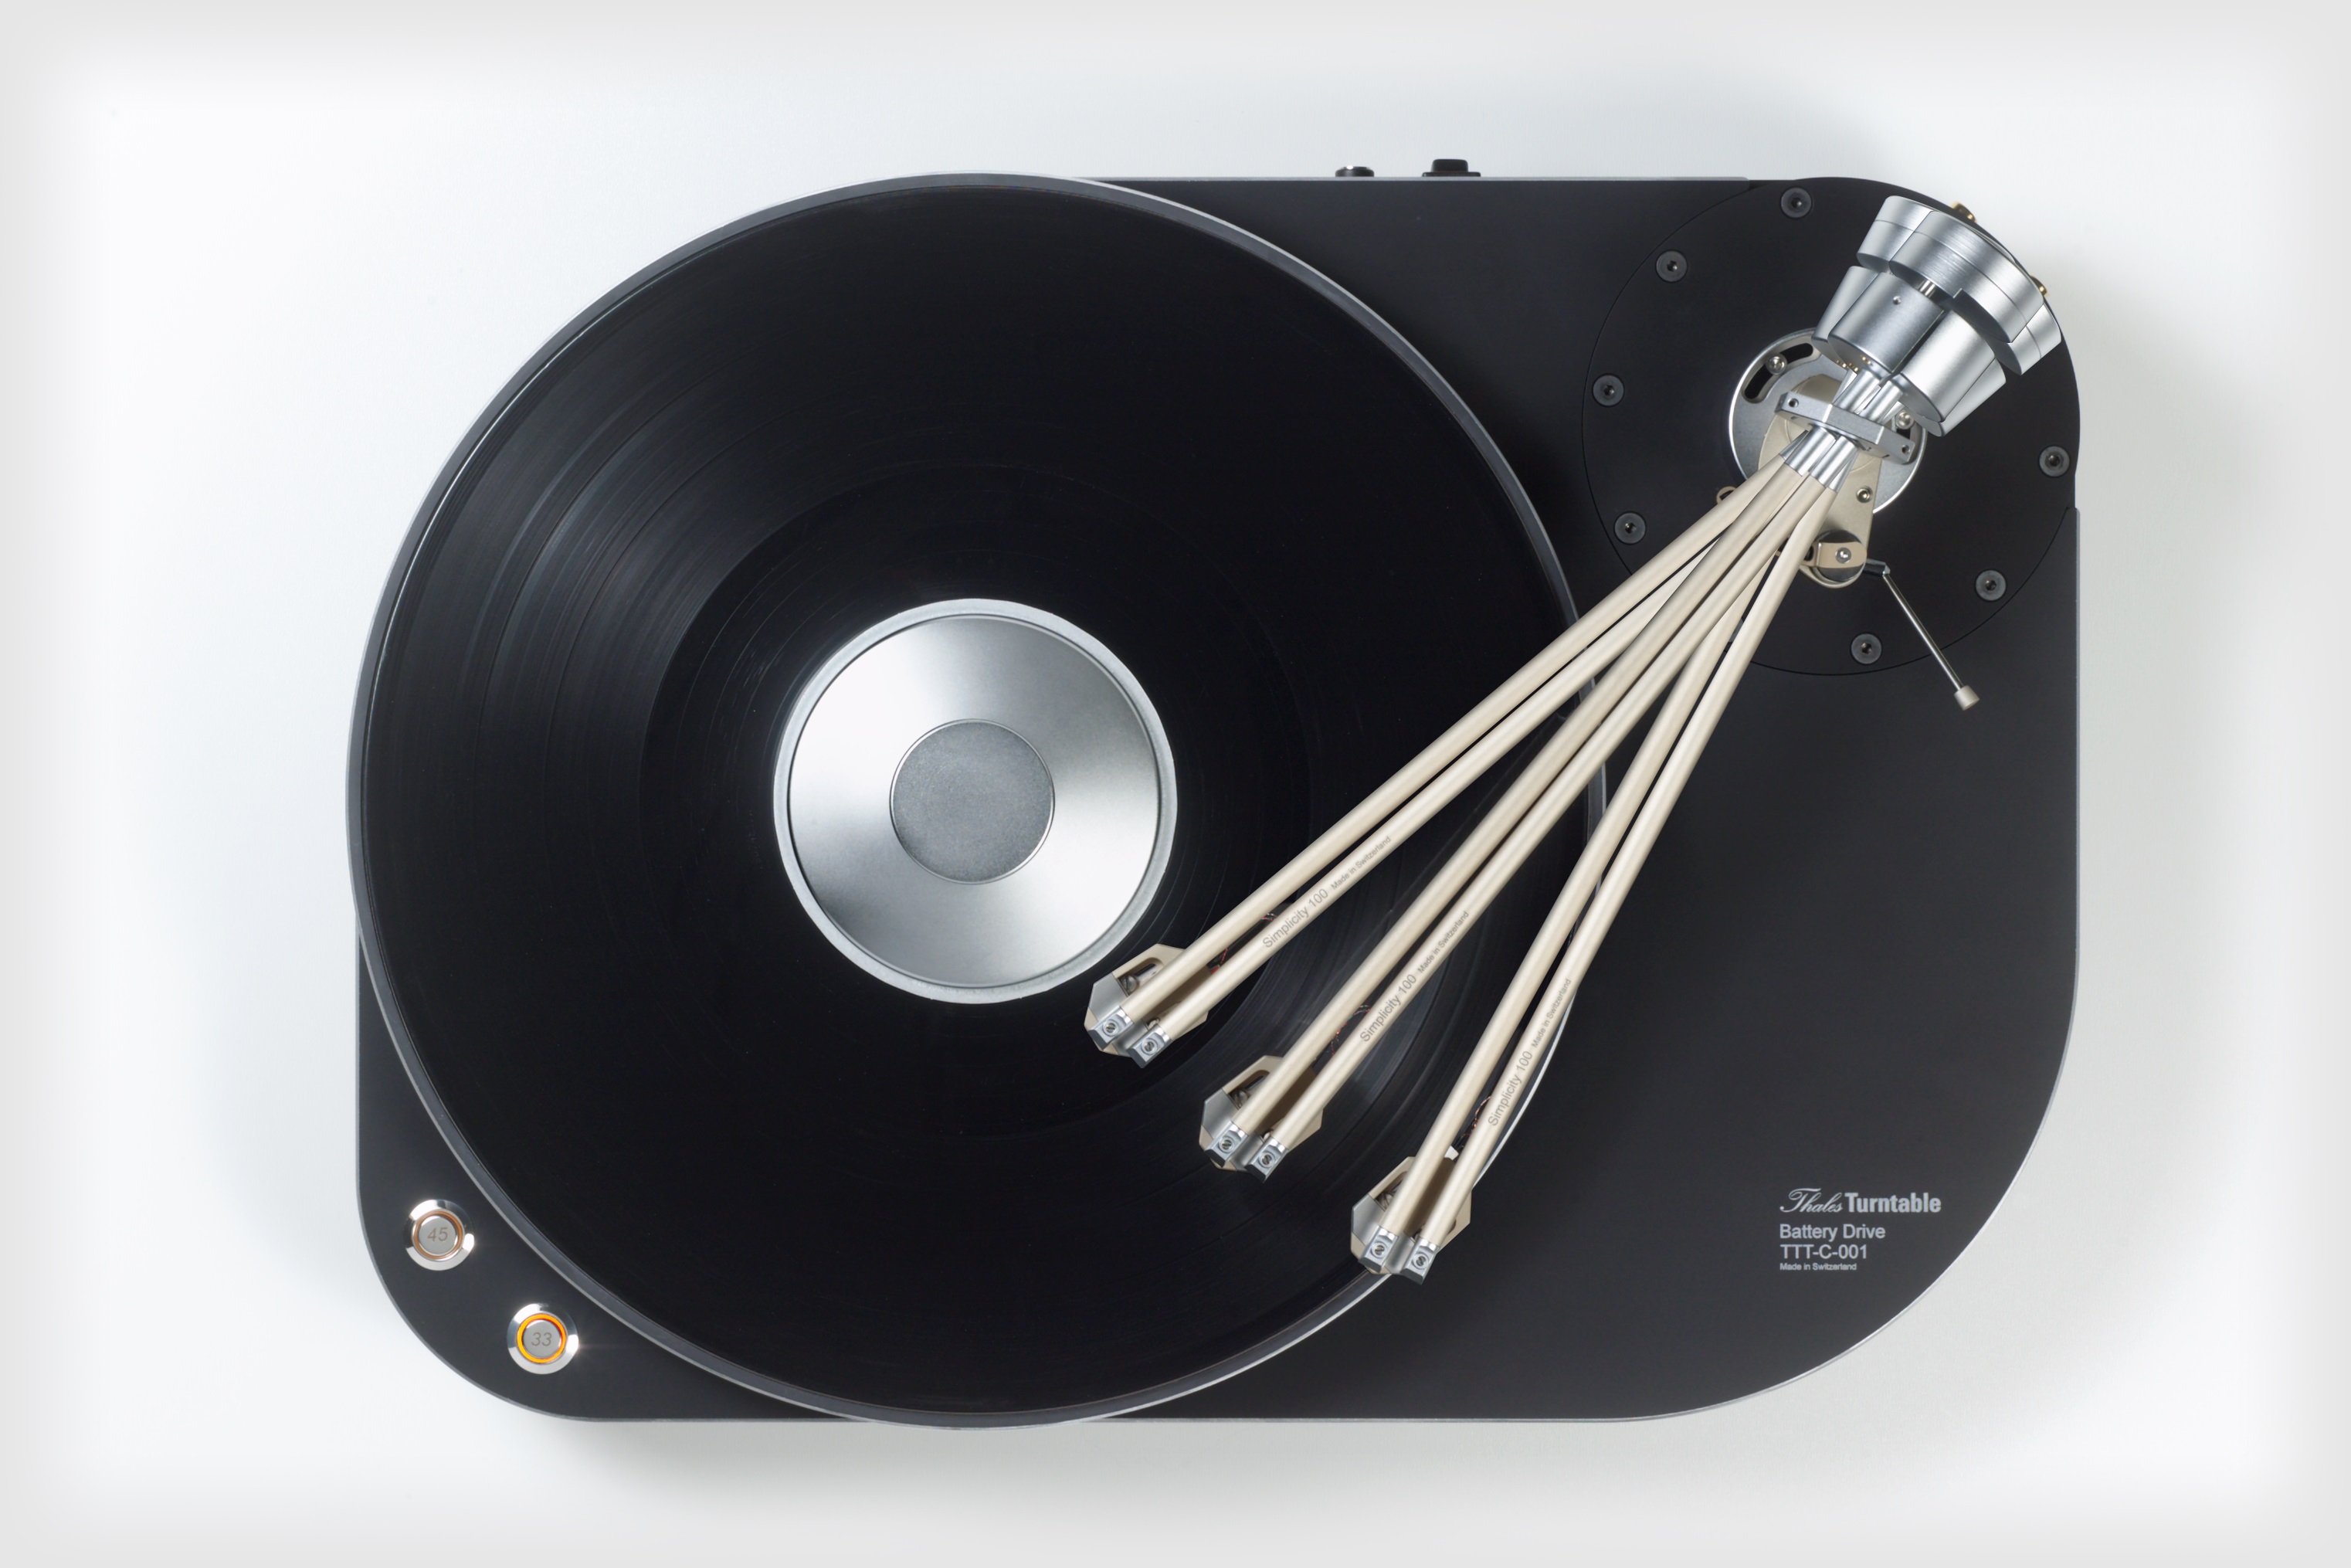 Тонарм Thales easy. Thales Turntable. Phasemation cm-1000. Phasemation PP-300..